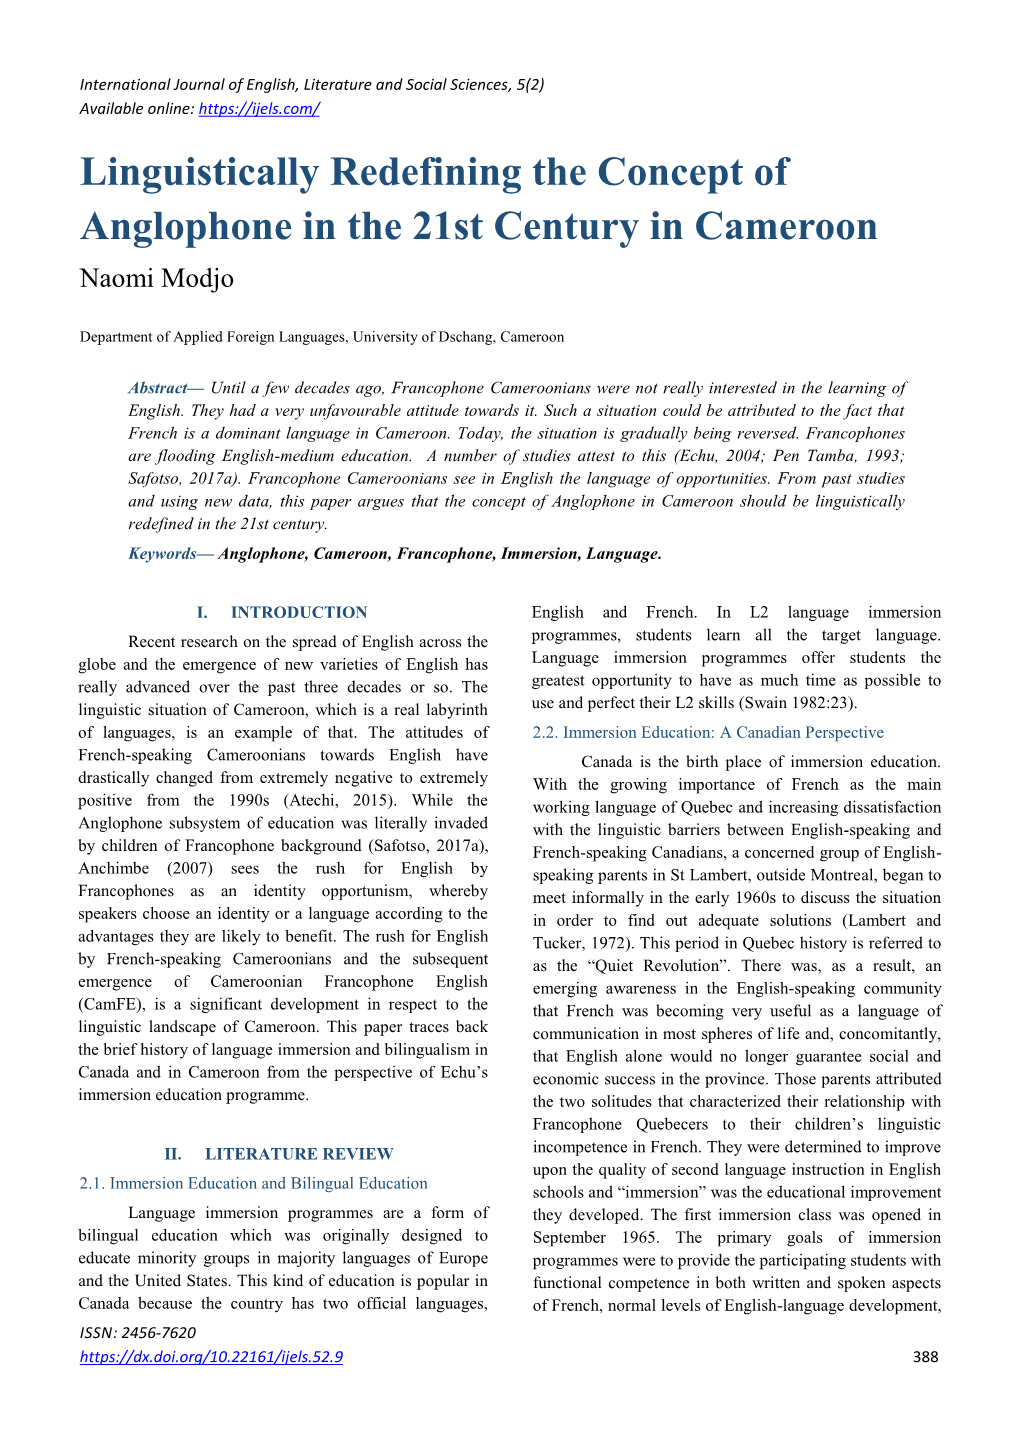 Linguistically Redefining the Concept of Anglophone in the 21St Century in Cameroon Naomi Modjo